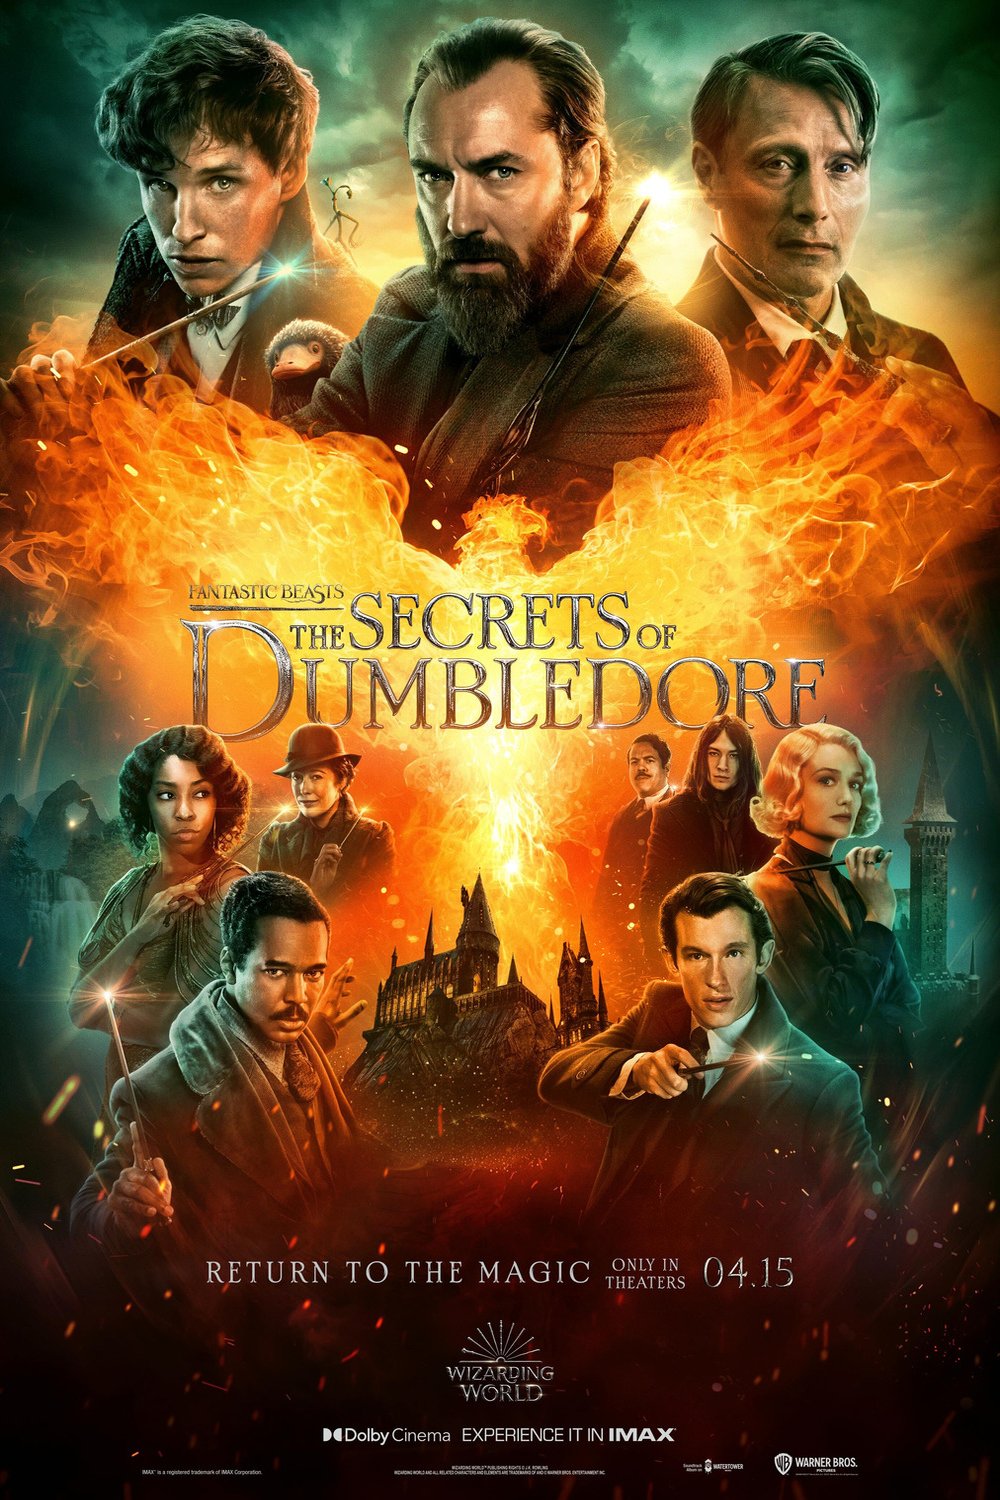 Poster of the movie Fantastic Beasts: The Secrets of Dumbledore